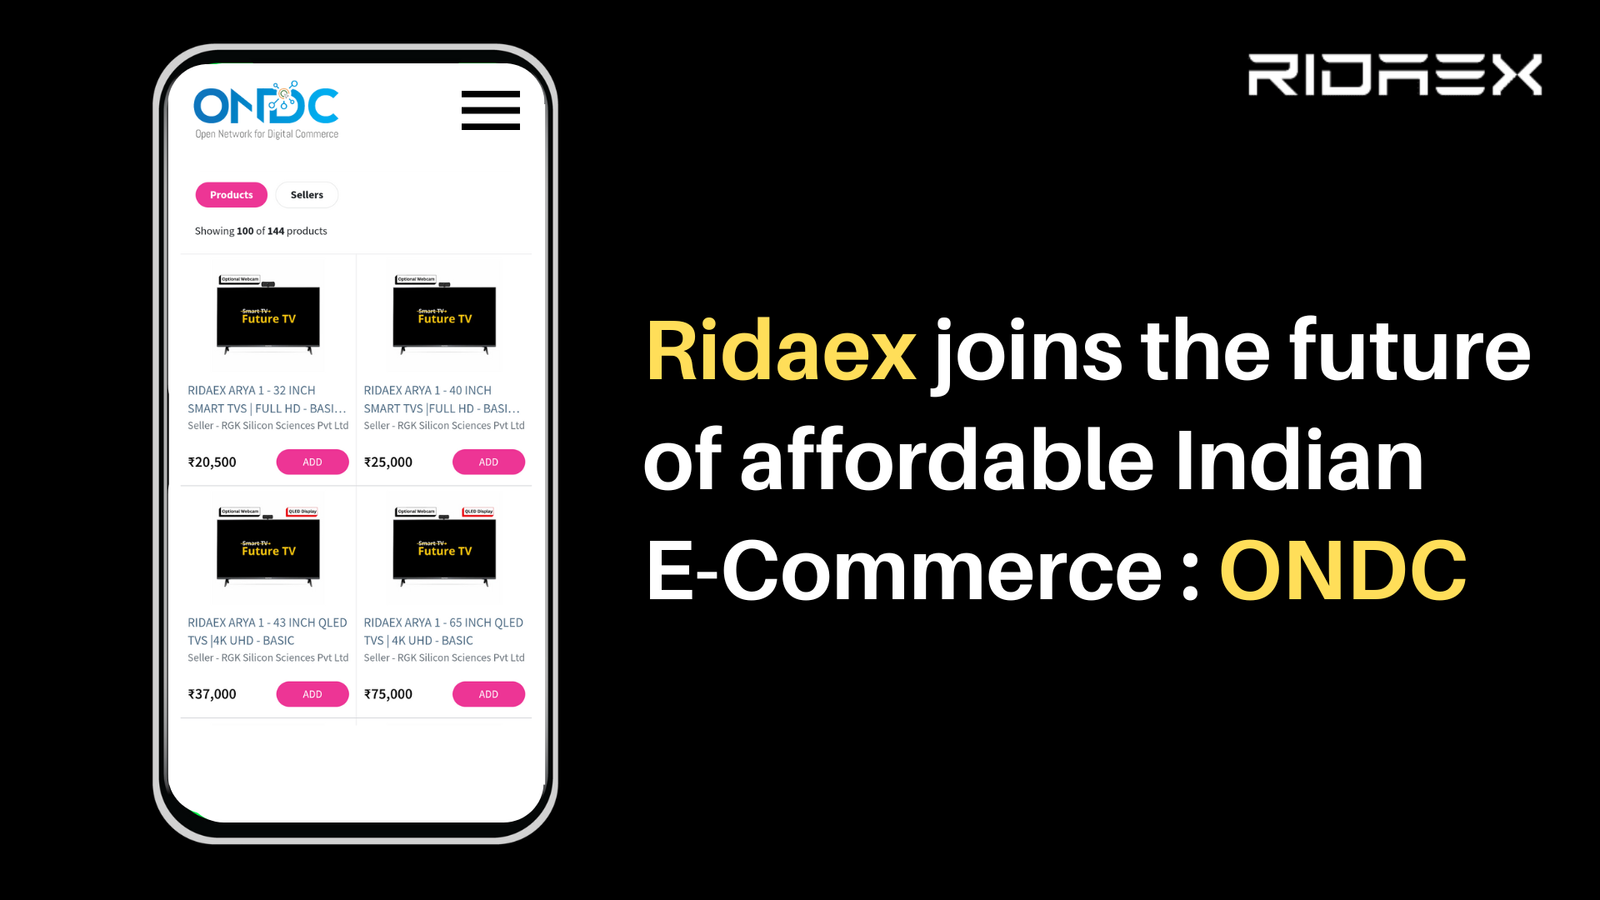 Ridaex joins the "future affordable E-Commerce : ONDC "